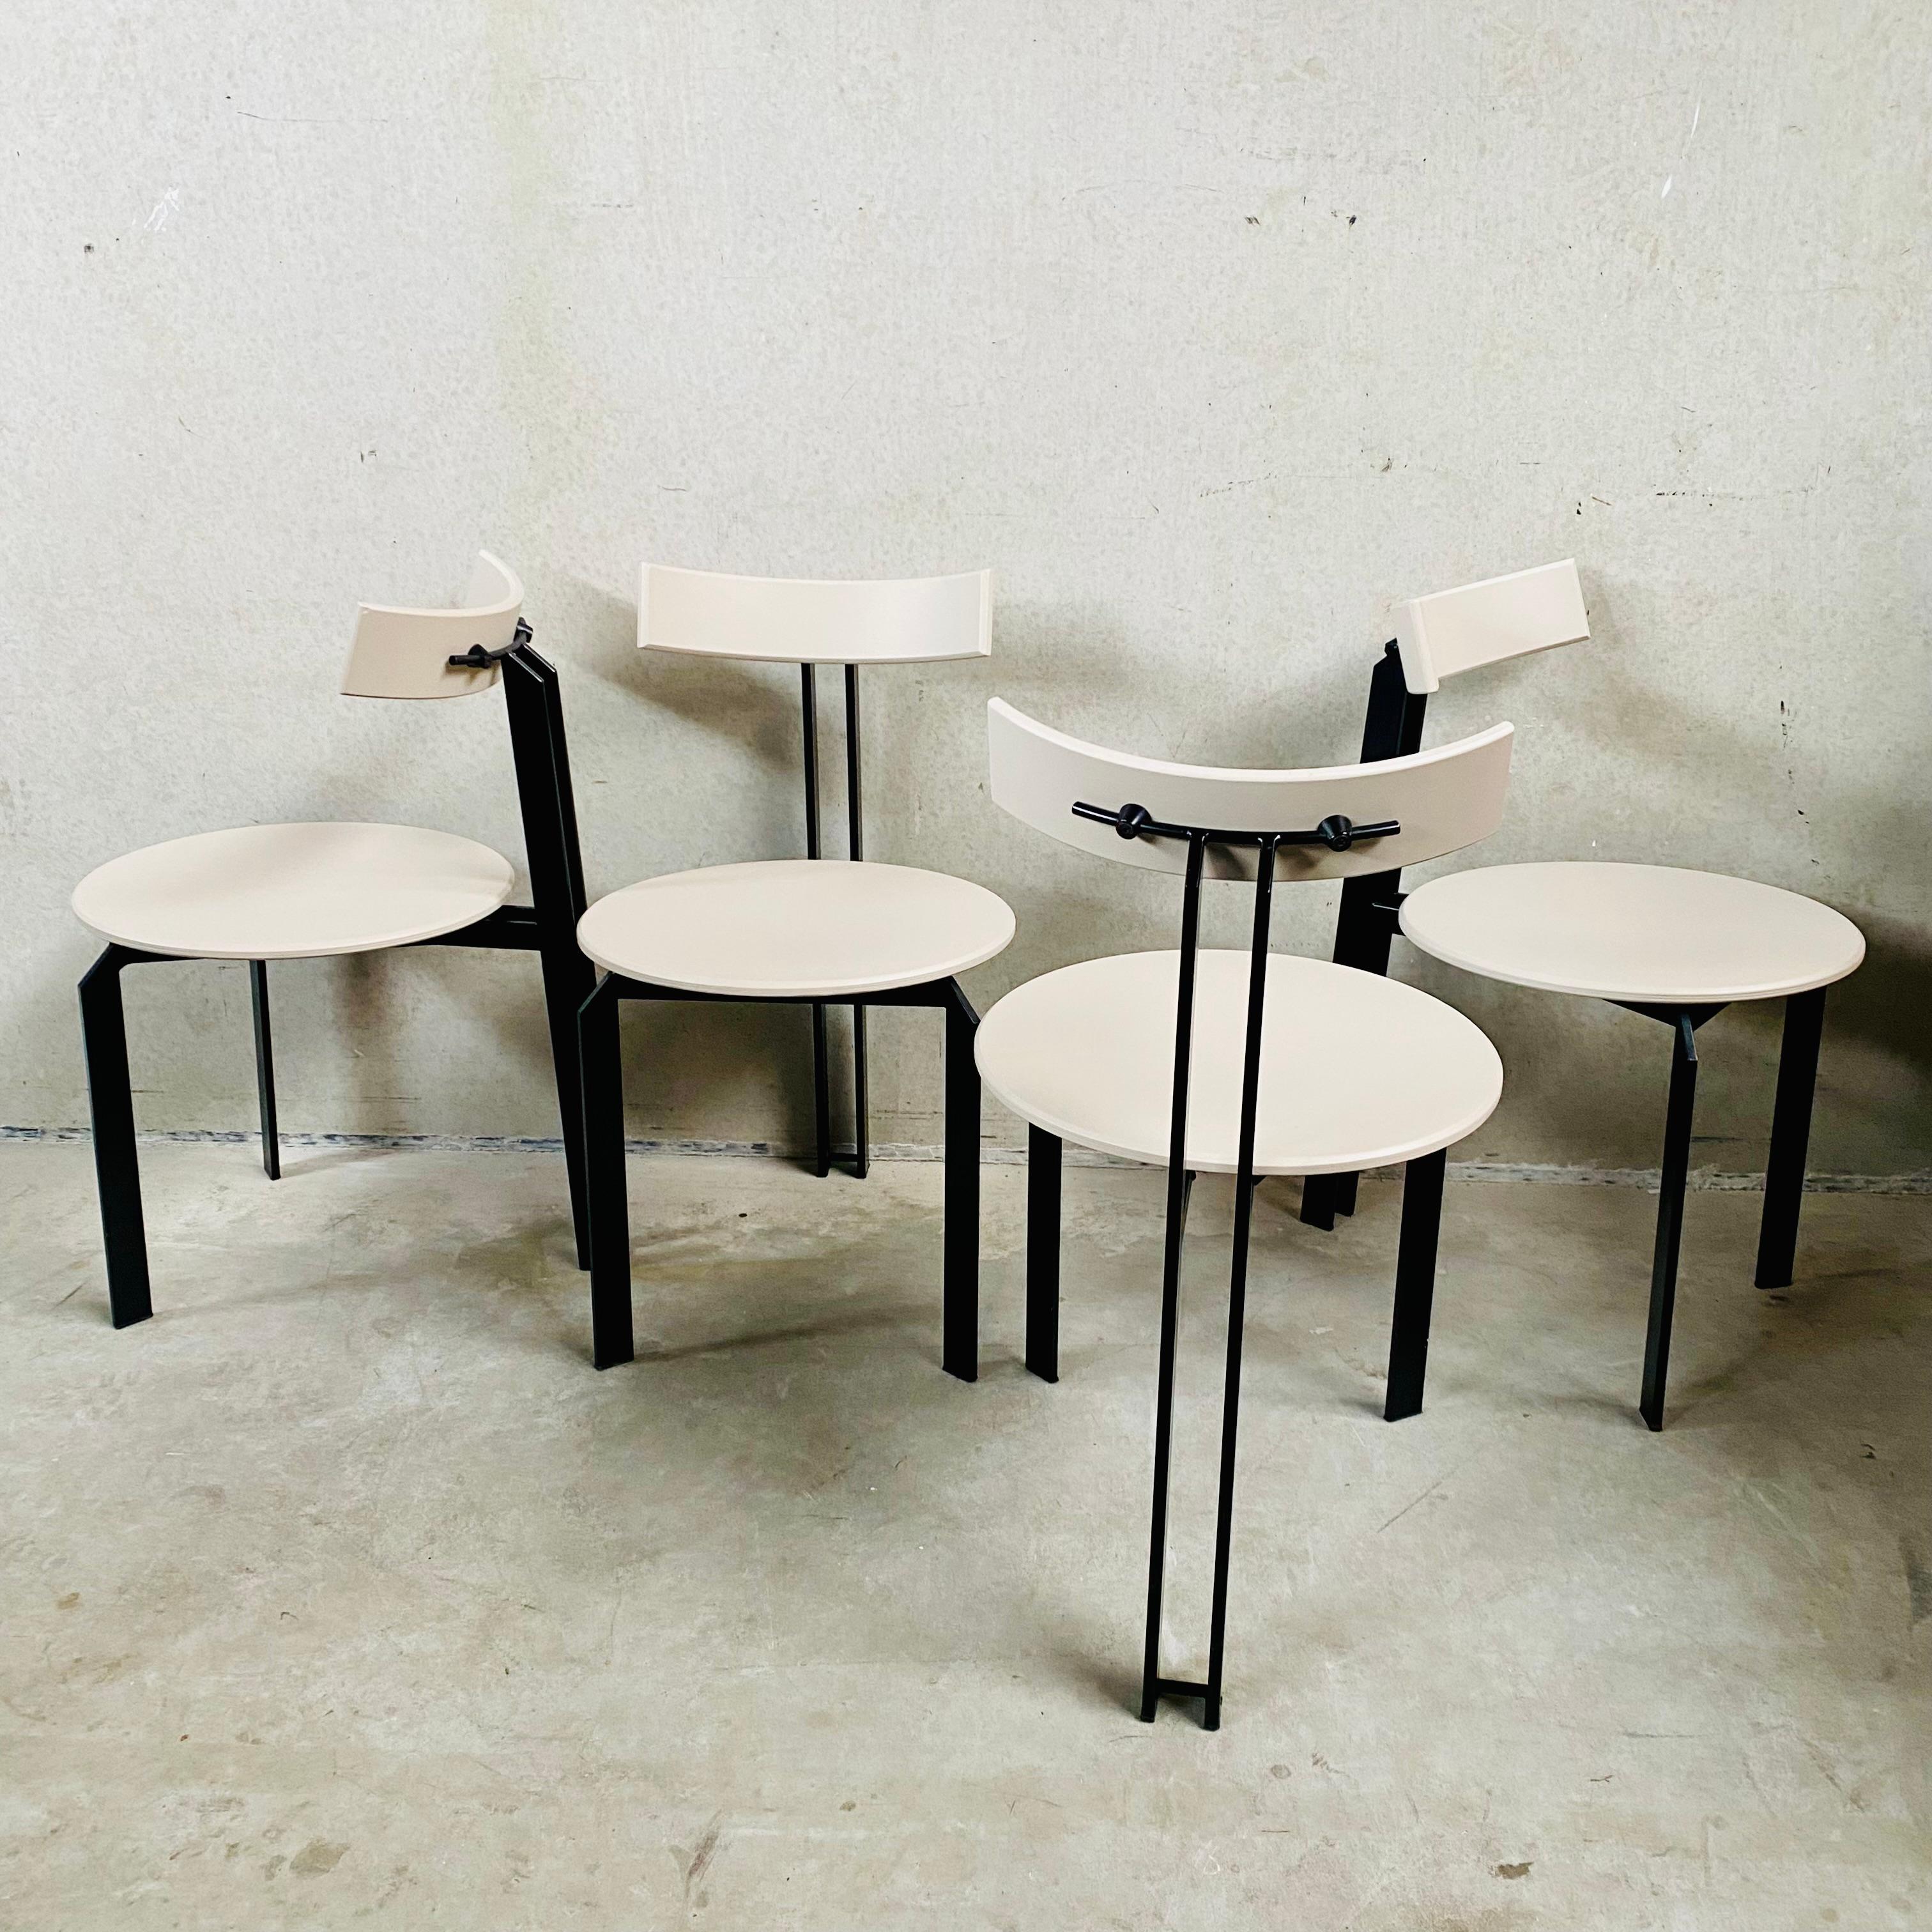 4 x Brutalist ZETA Dining Chairs by Martin Haksteen for Harvink, Netherlands  For Sale 6